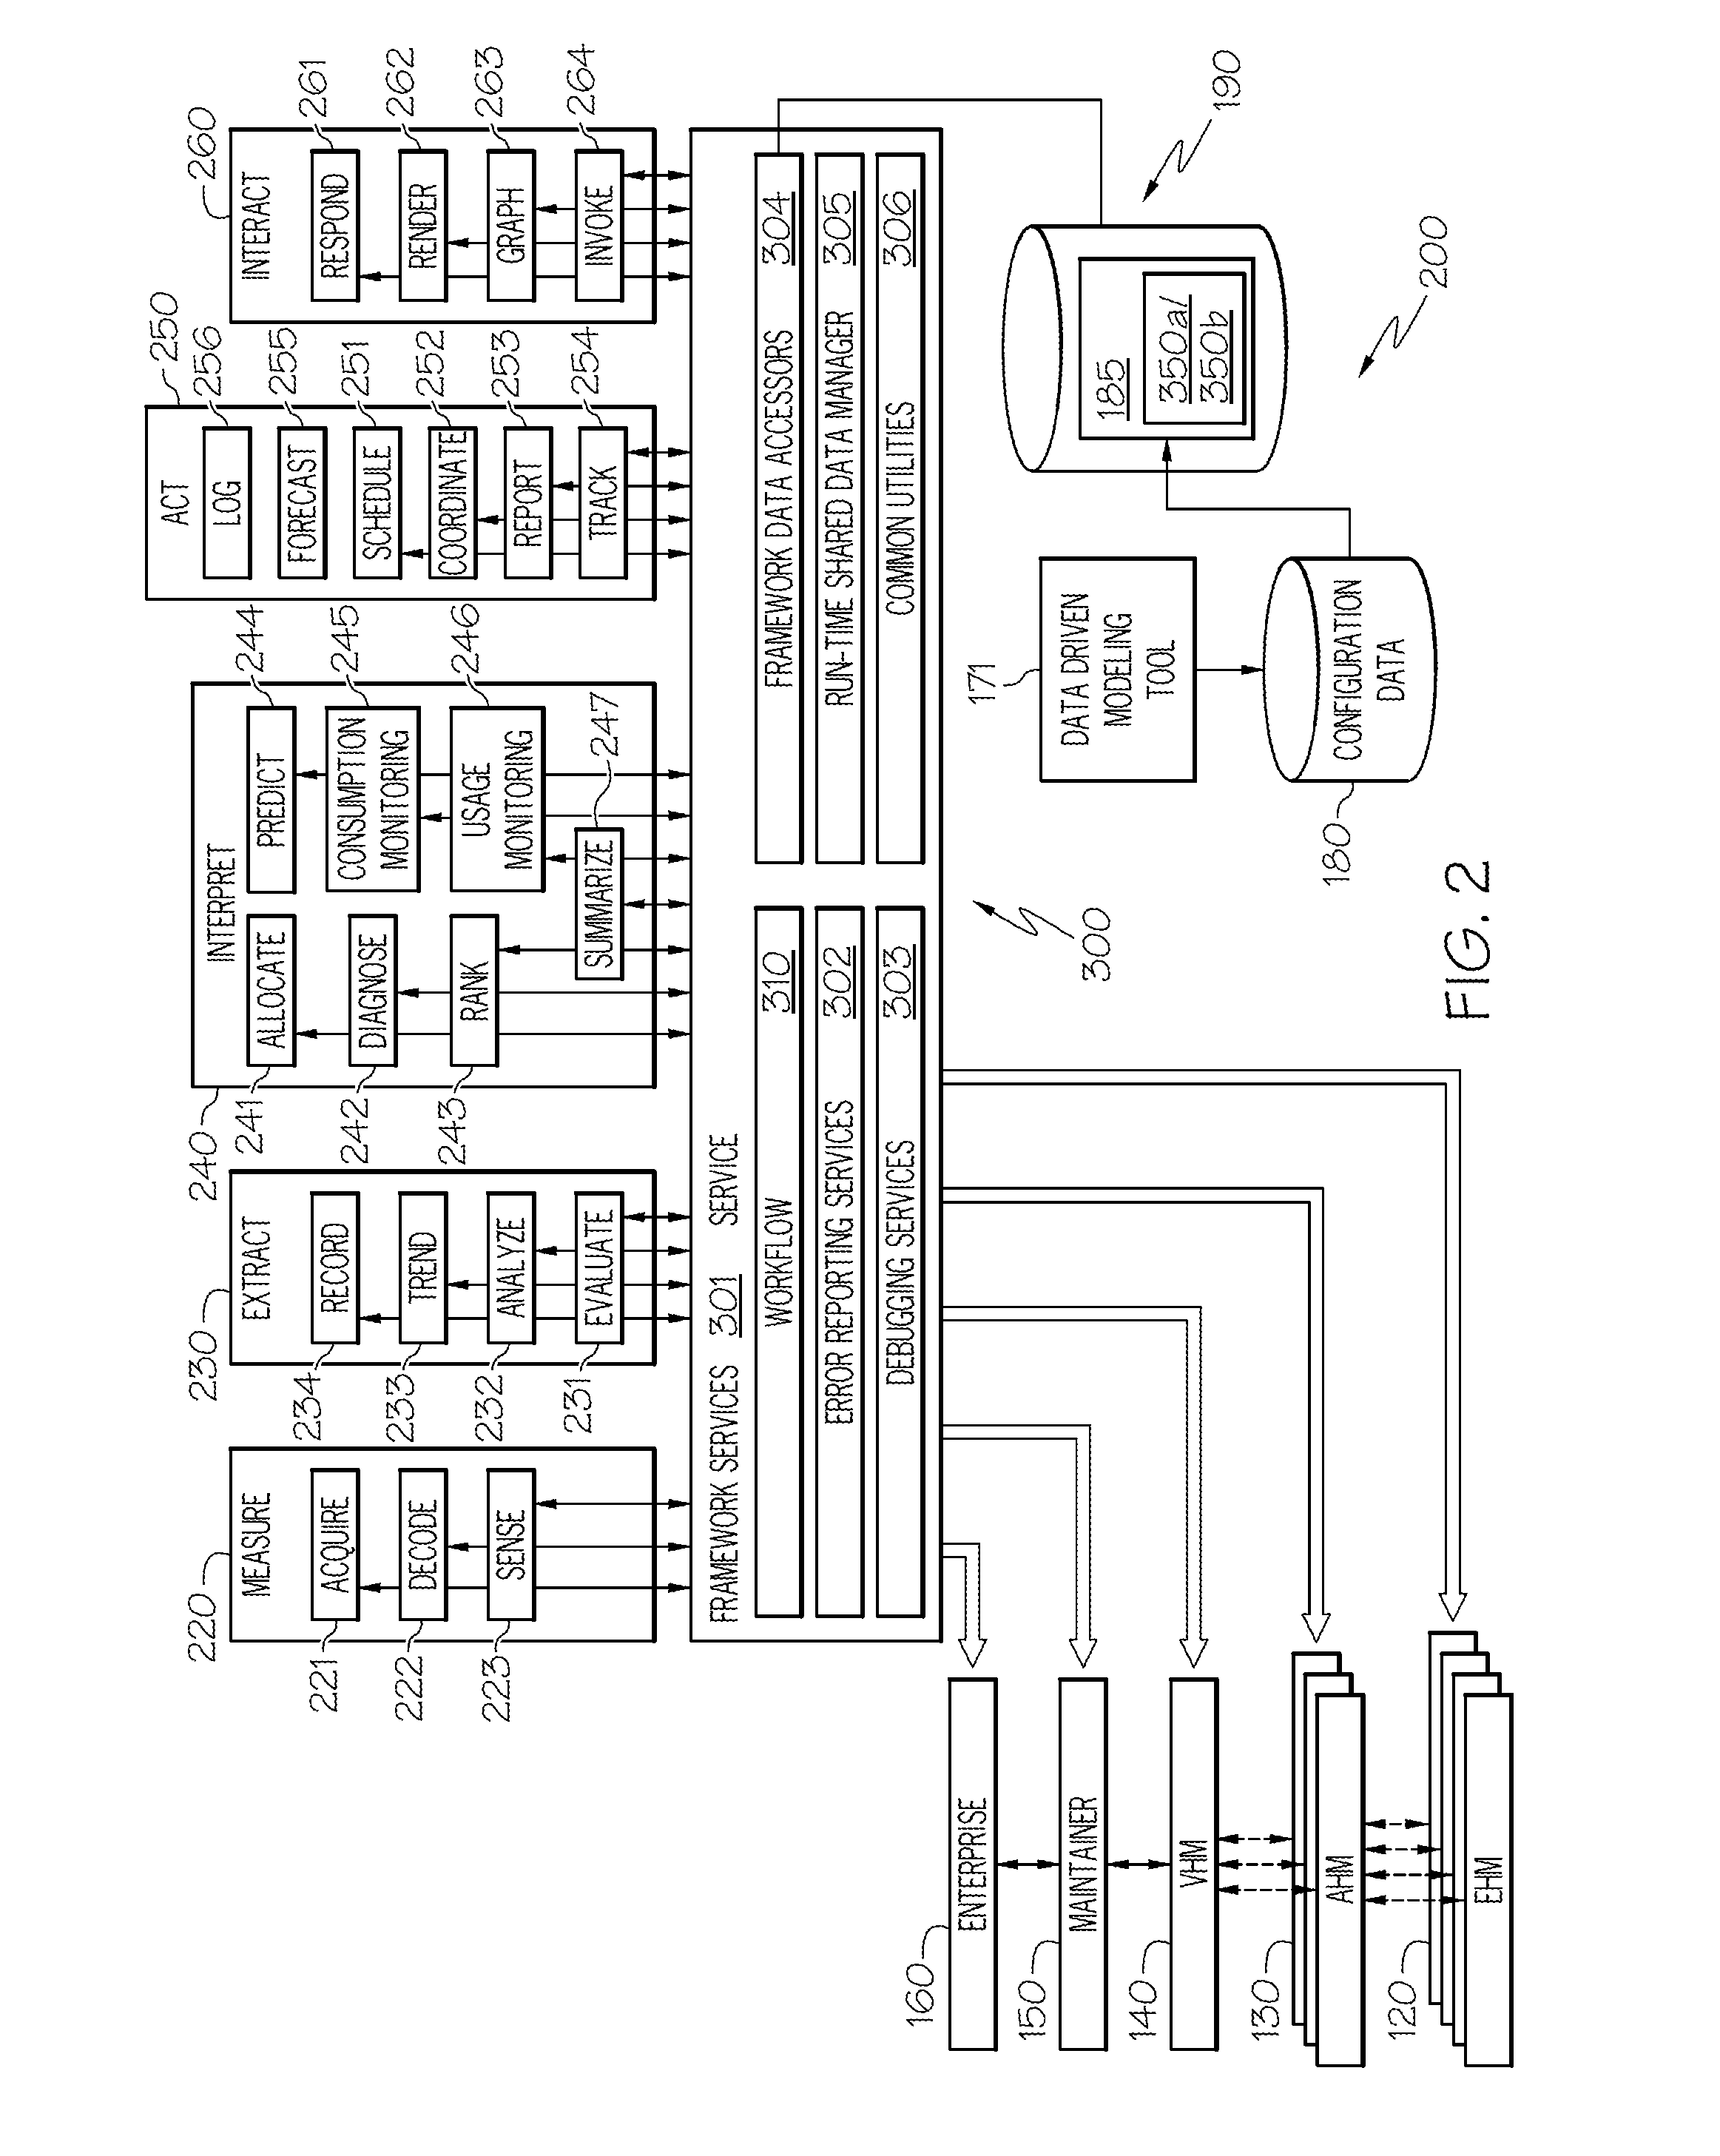 Method for performing condition based data acquisition in a hierarchically distributed condition based maintenance system